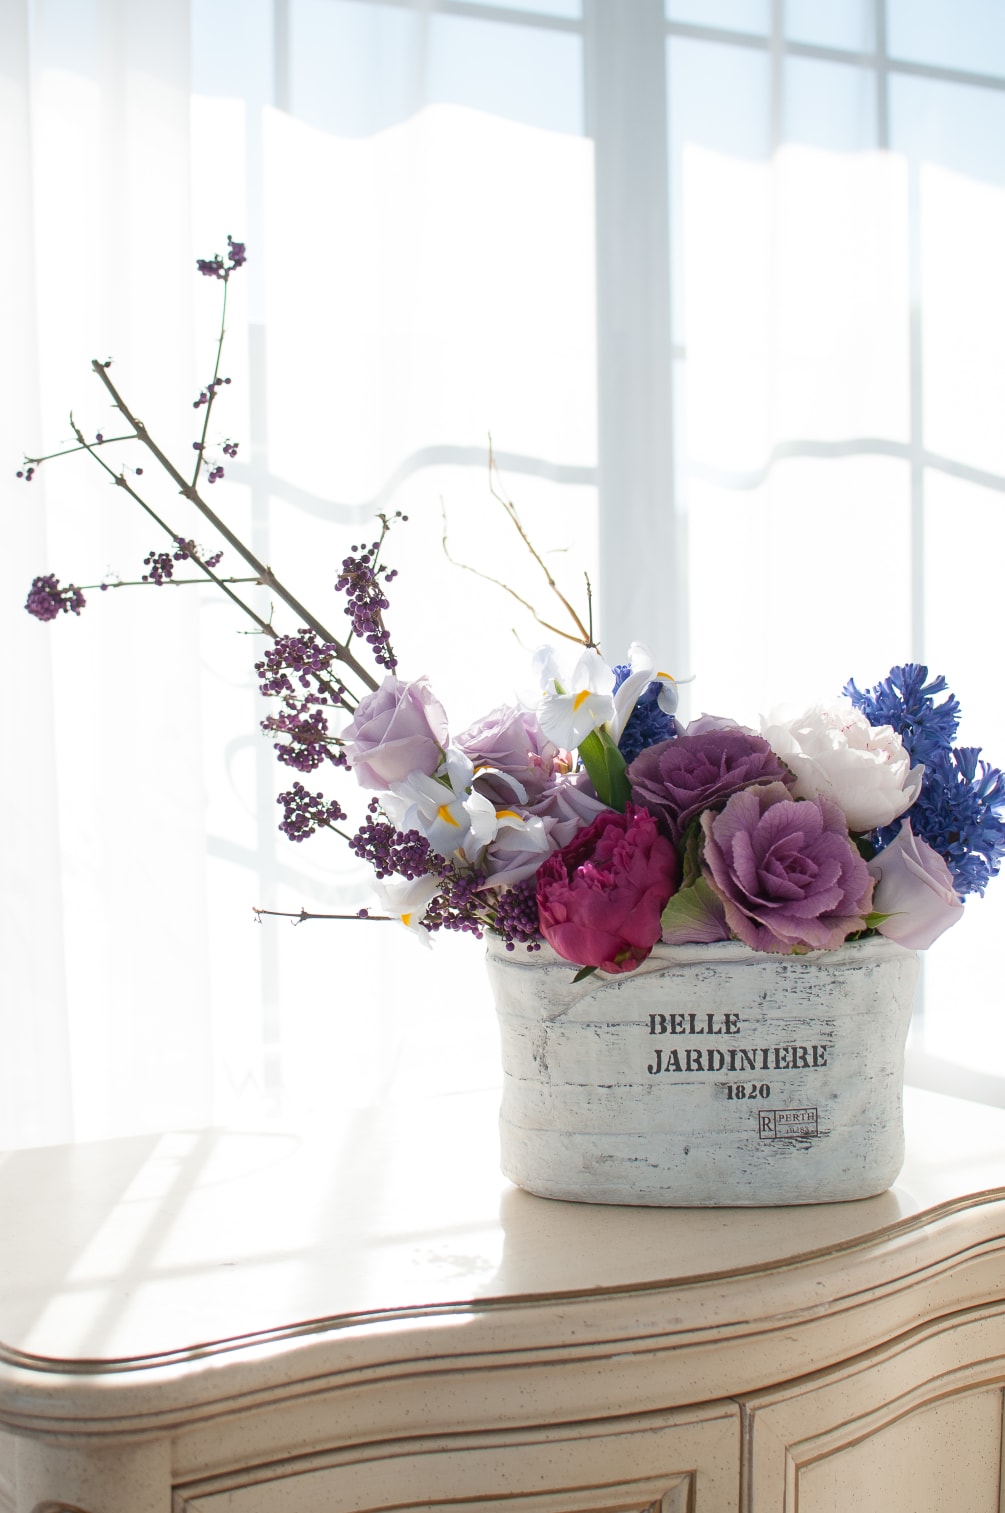 Our gorgeous ceramic containers pair perfectly with purple flowers such as kale